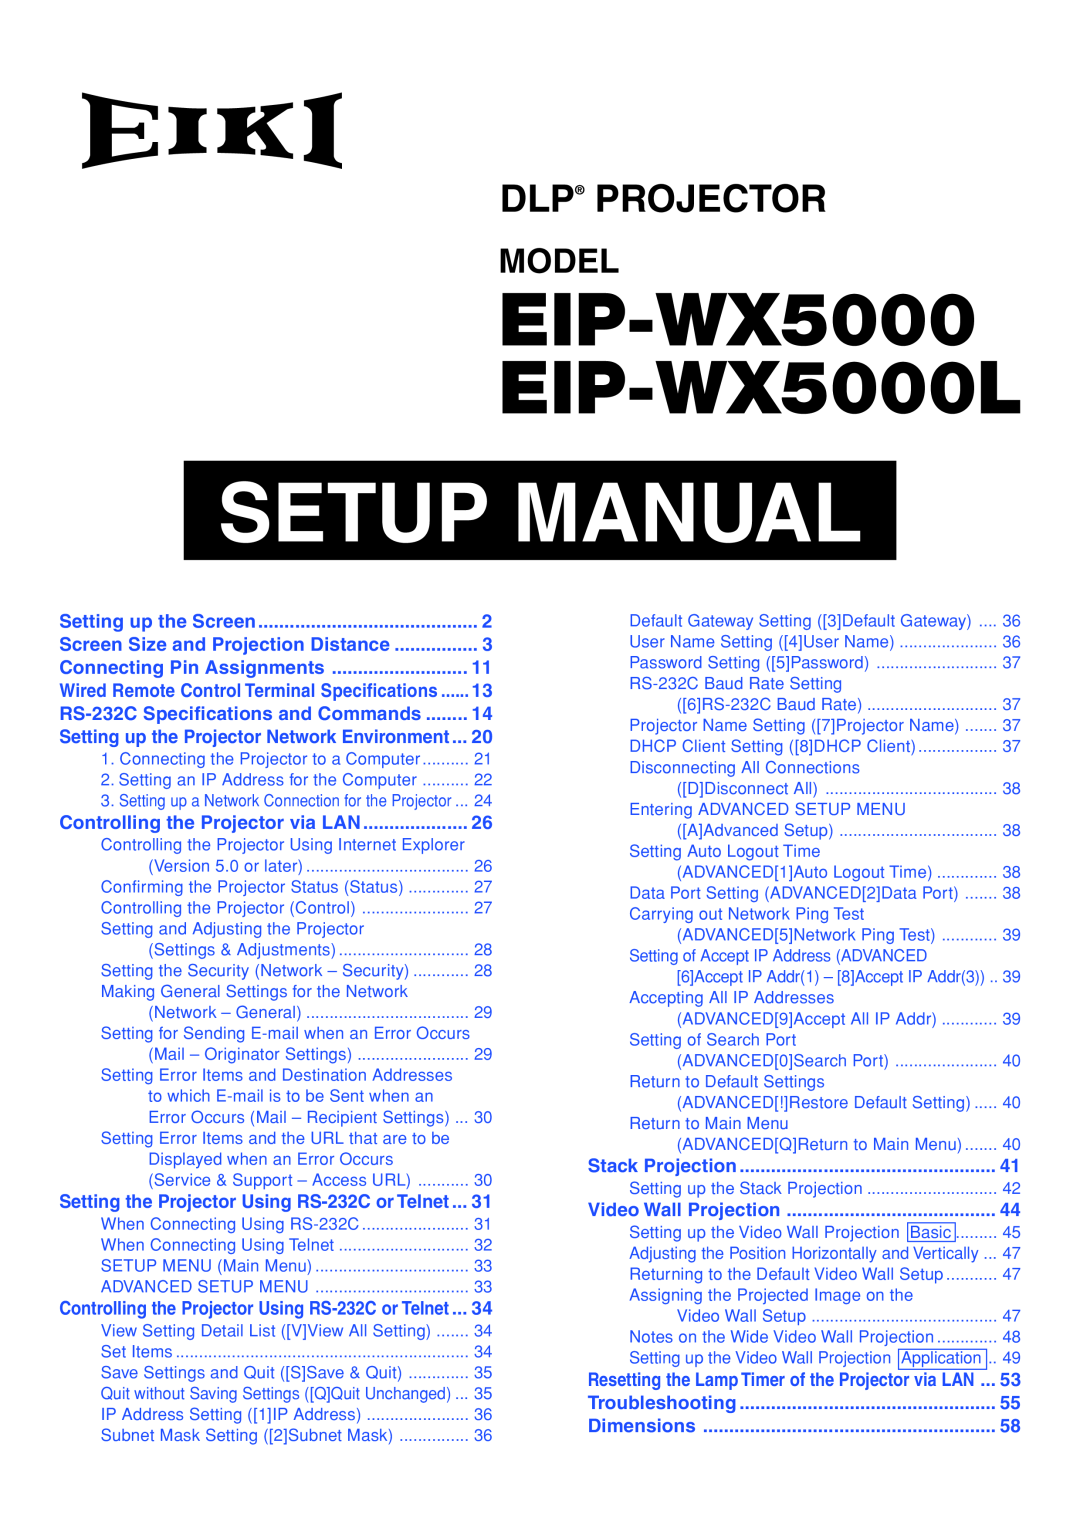 Eiki specifications Setup Manual, EIP-WX5000 EIP-WX5000L, Dlp Projector, Model, Screen Size and Projection Distance 